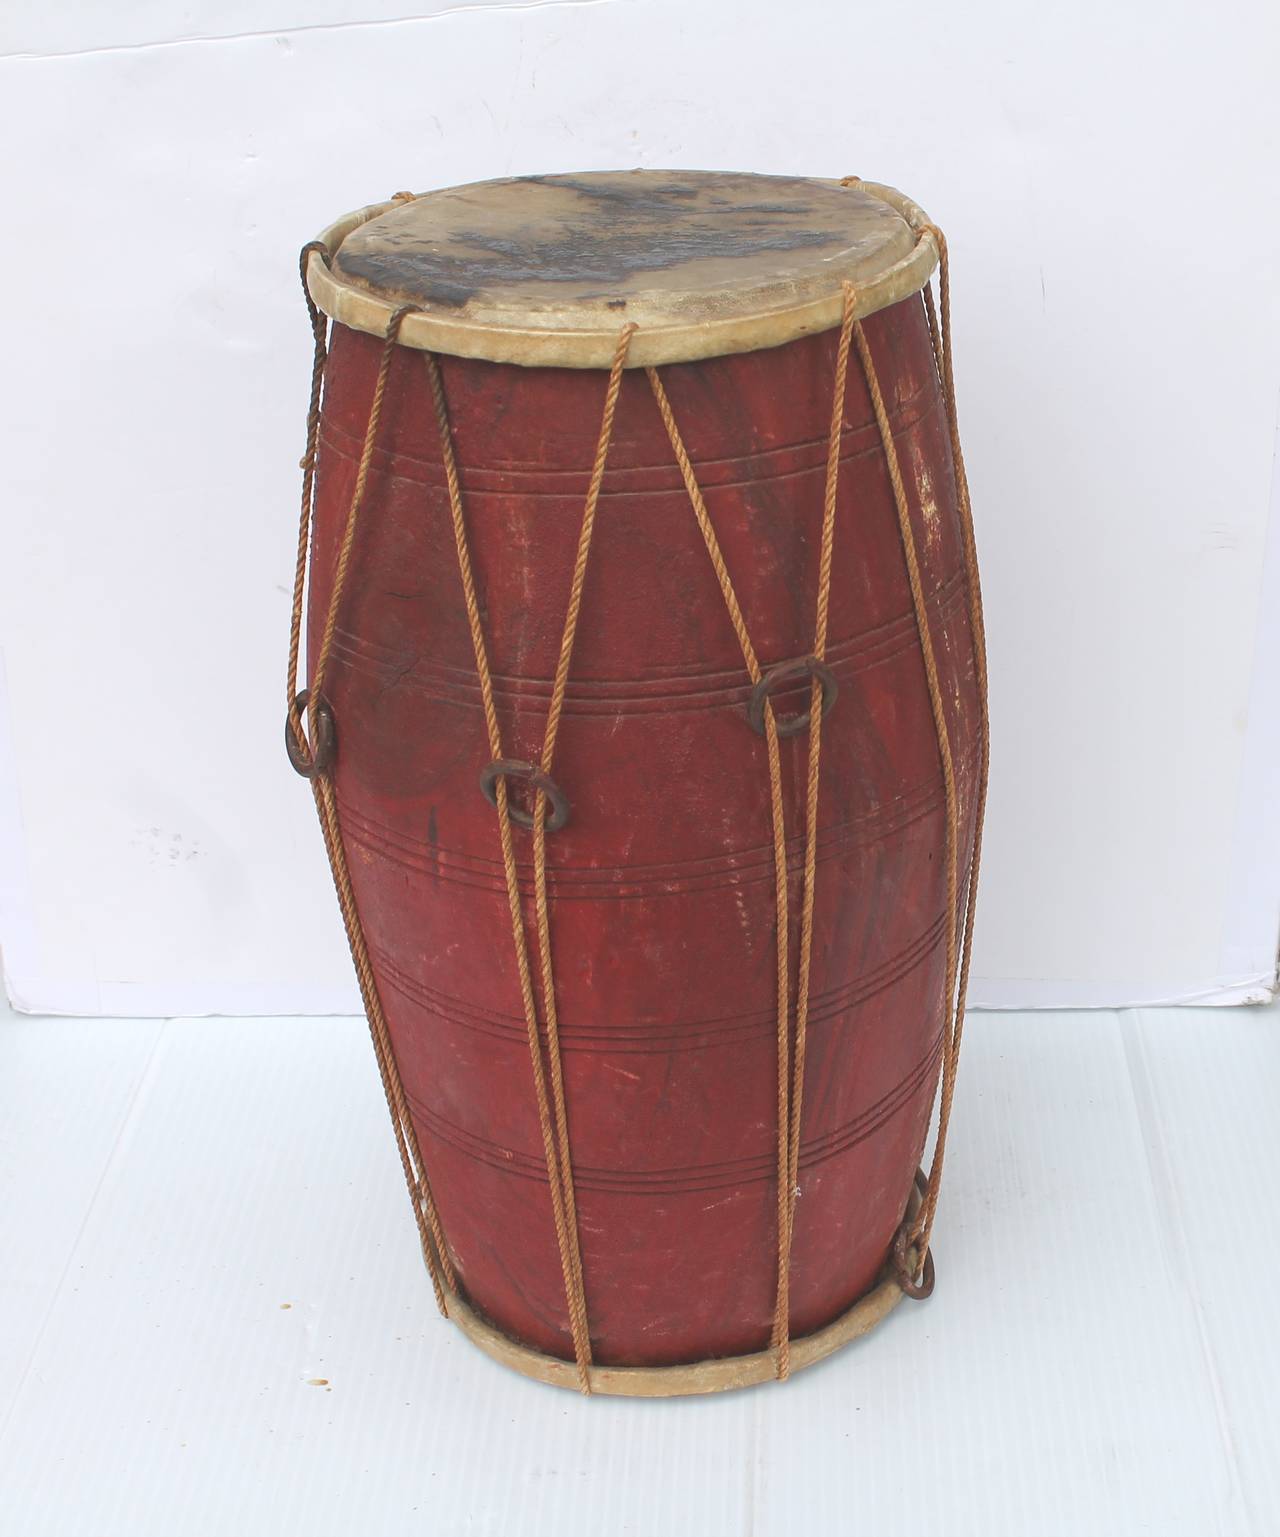 This is quite rare to find and such an odd and early probably Pueblo ceremonial drum in a wonderful untouched red surface paint. The original hide is on the top and base. Fantastic patina and condition.